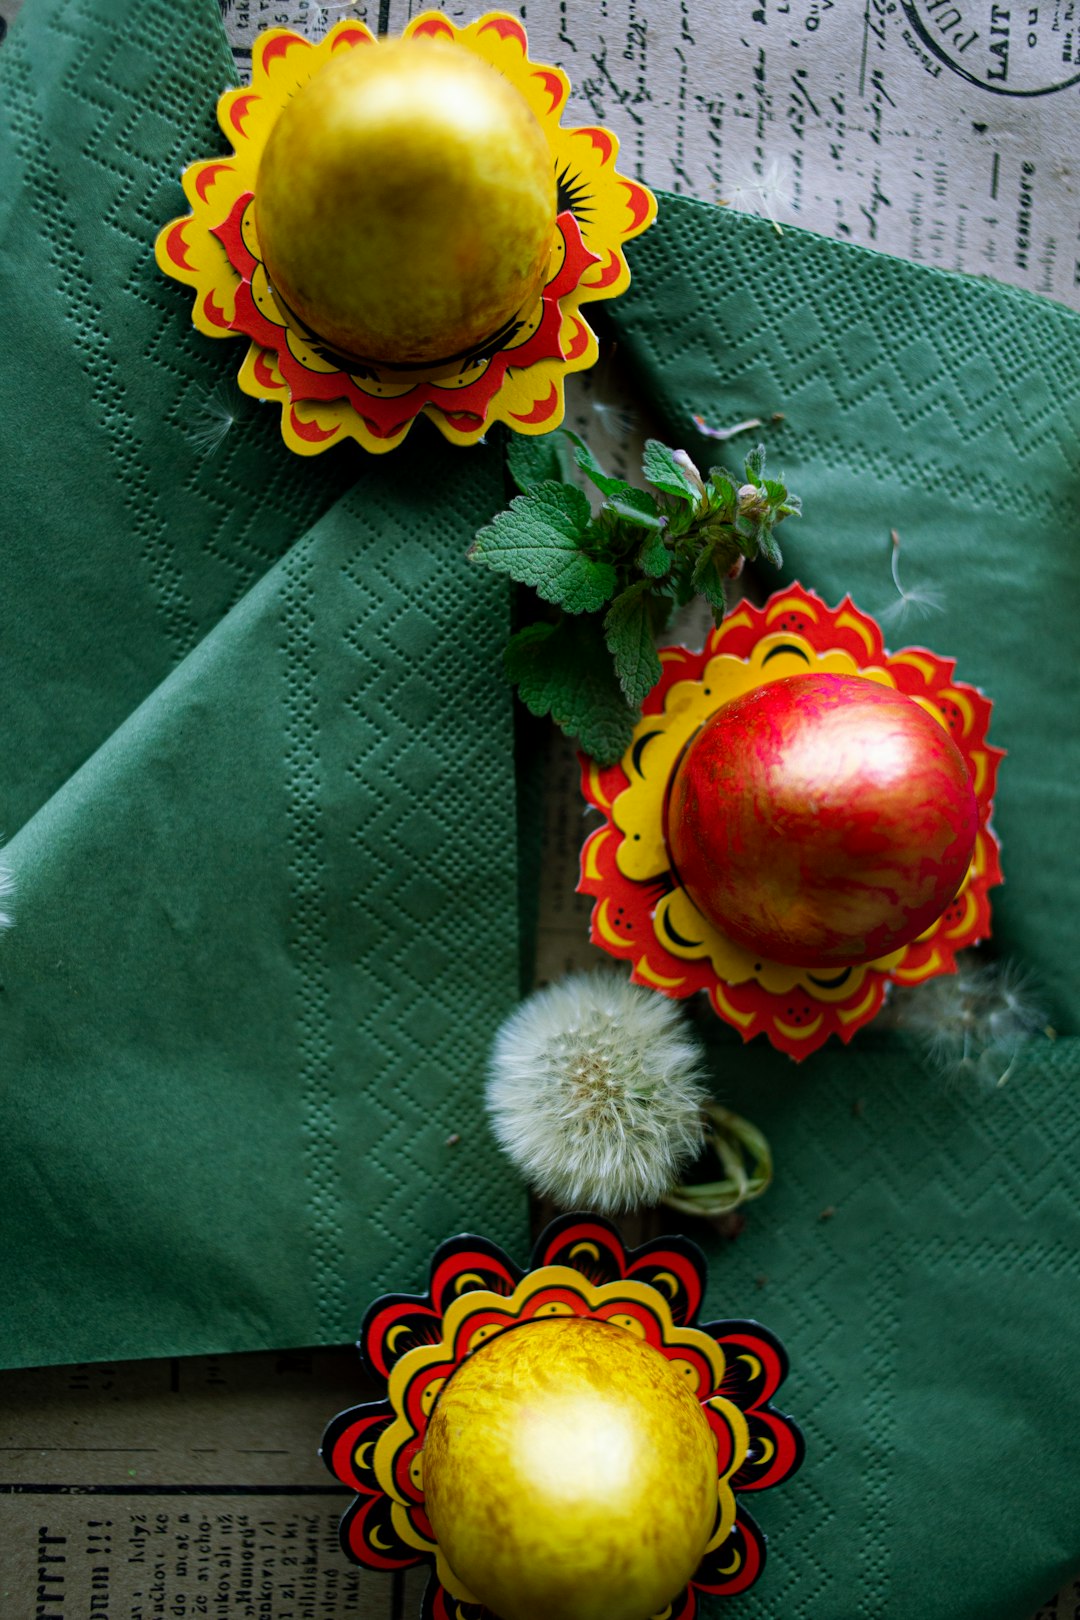 red apple fruit on green textile